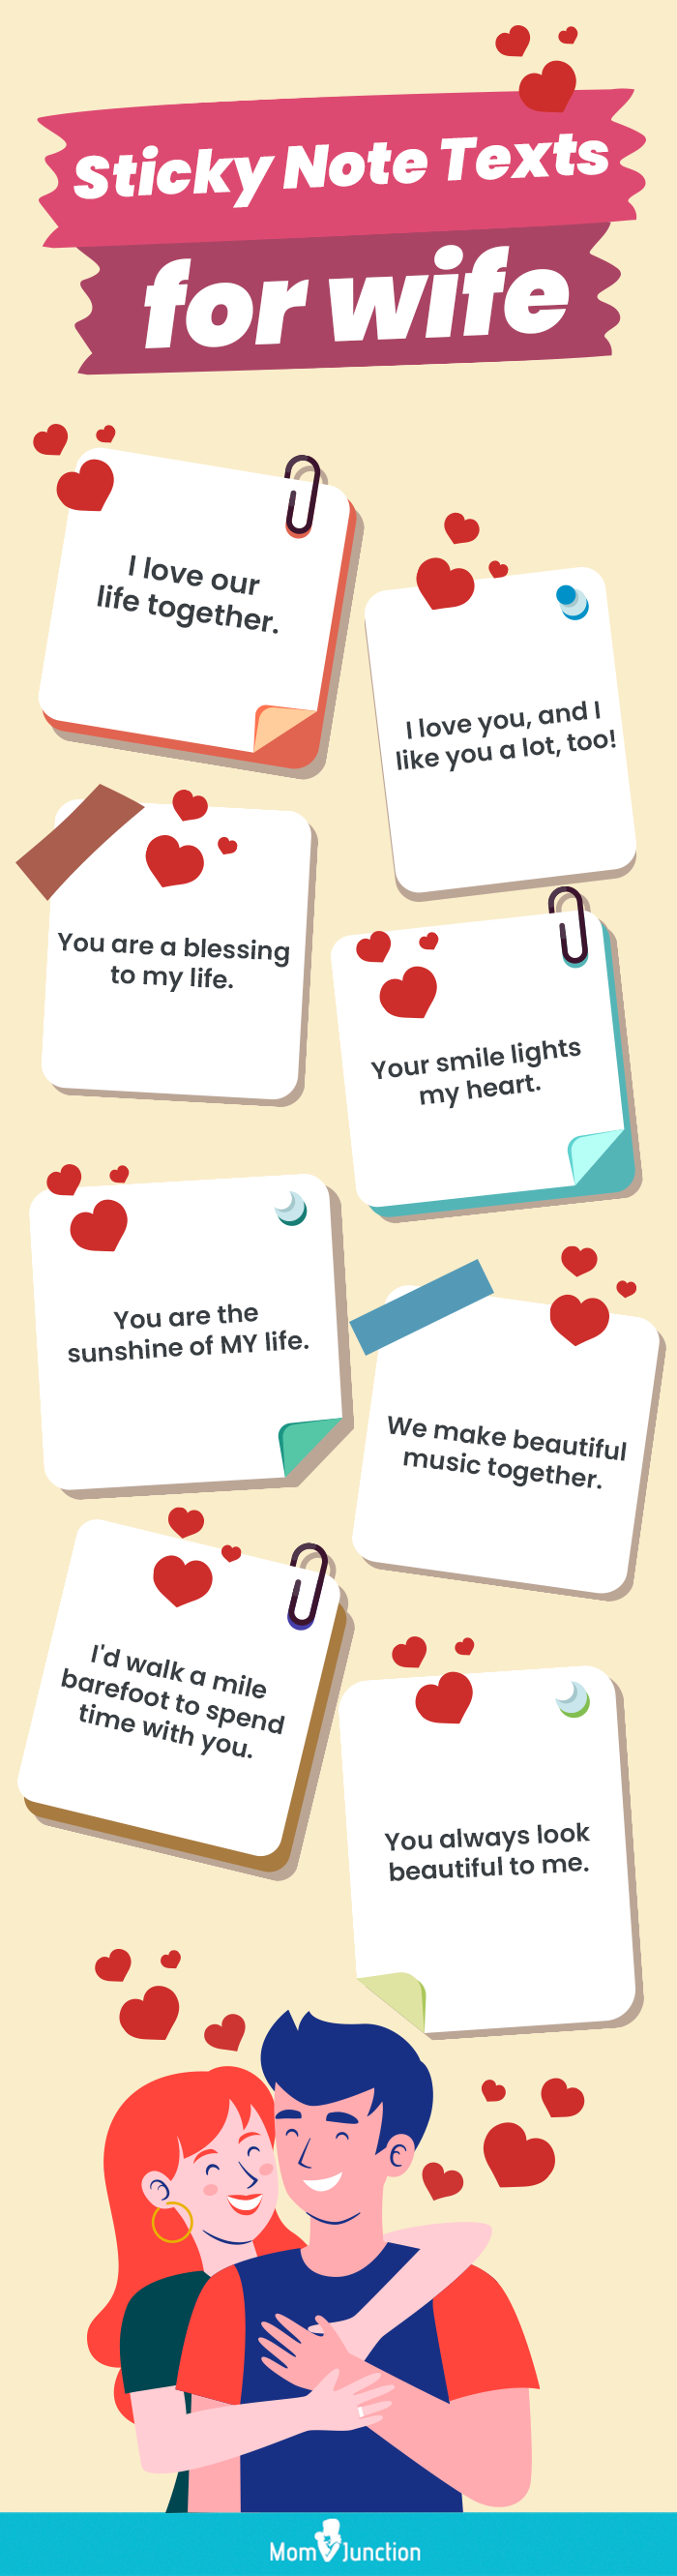 sticky note texts for wife [infographic]